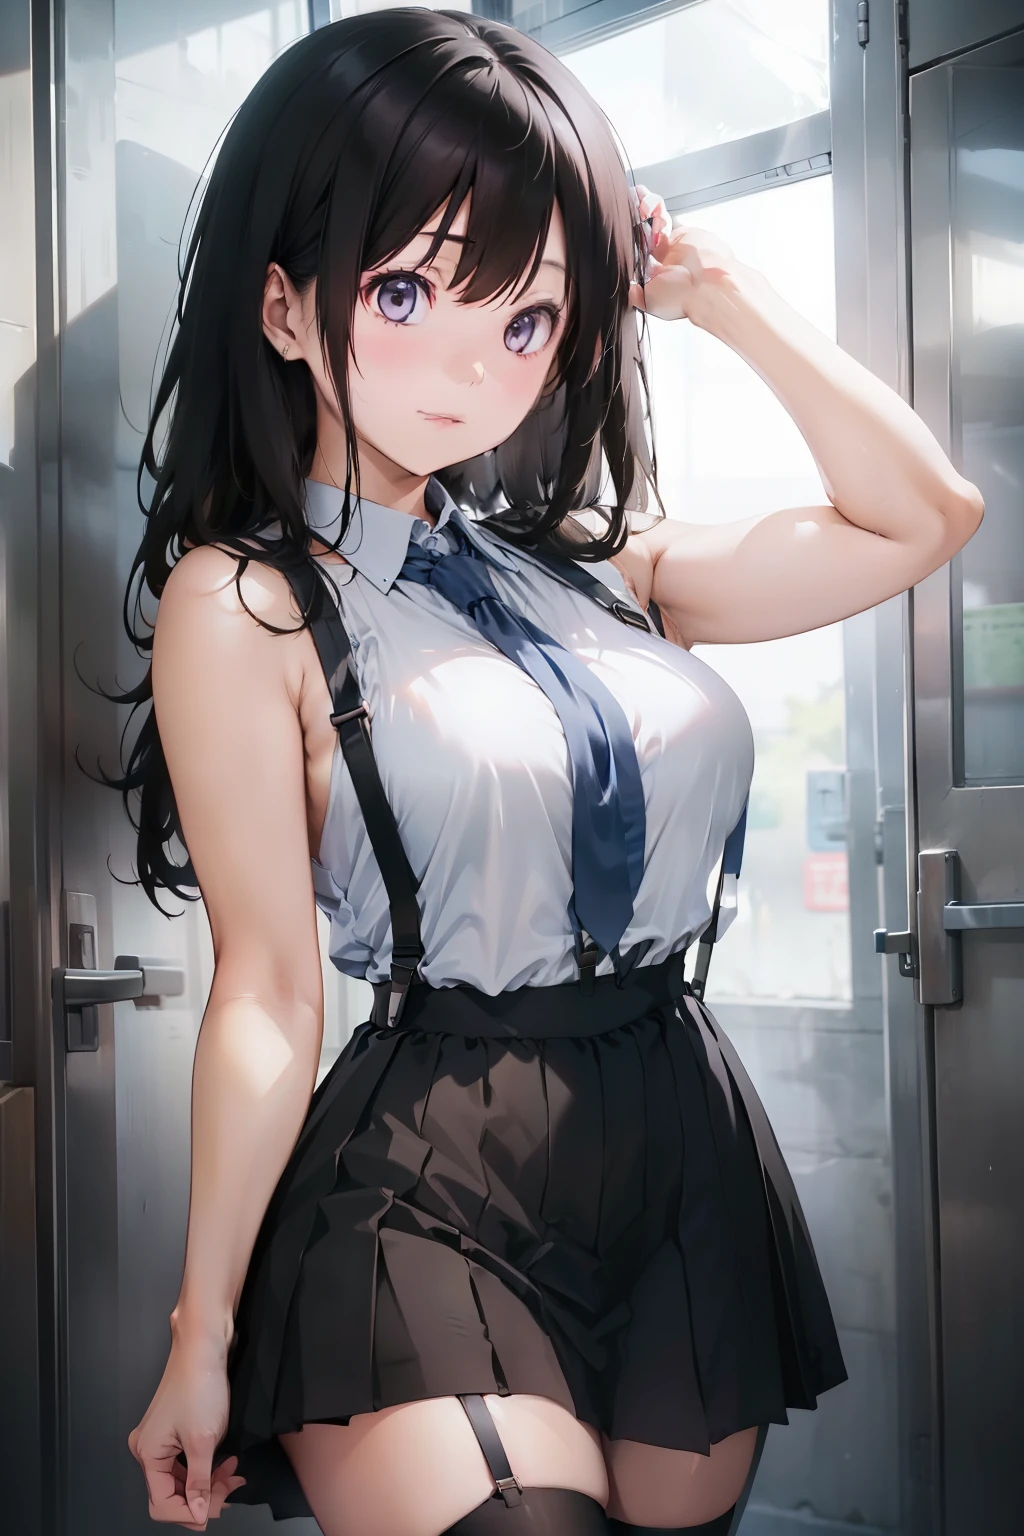 a black skirt, neck tie, Tank tops　suspenders, Long Black Hair, Gray eyes, holster, Garter belt on the legs, Moderately breasts, hands above your head, Big breasts, Pichi Pichi clothes, both sides